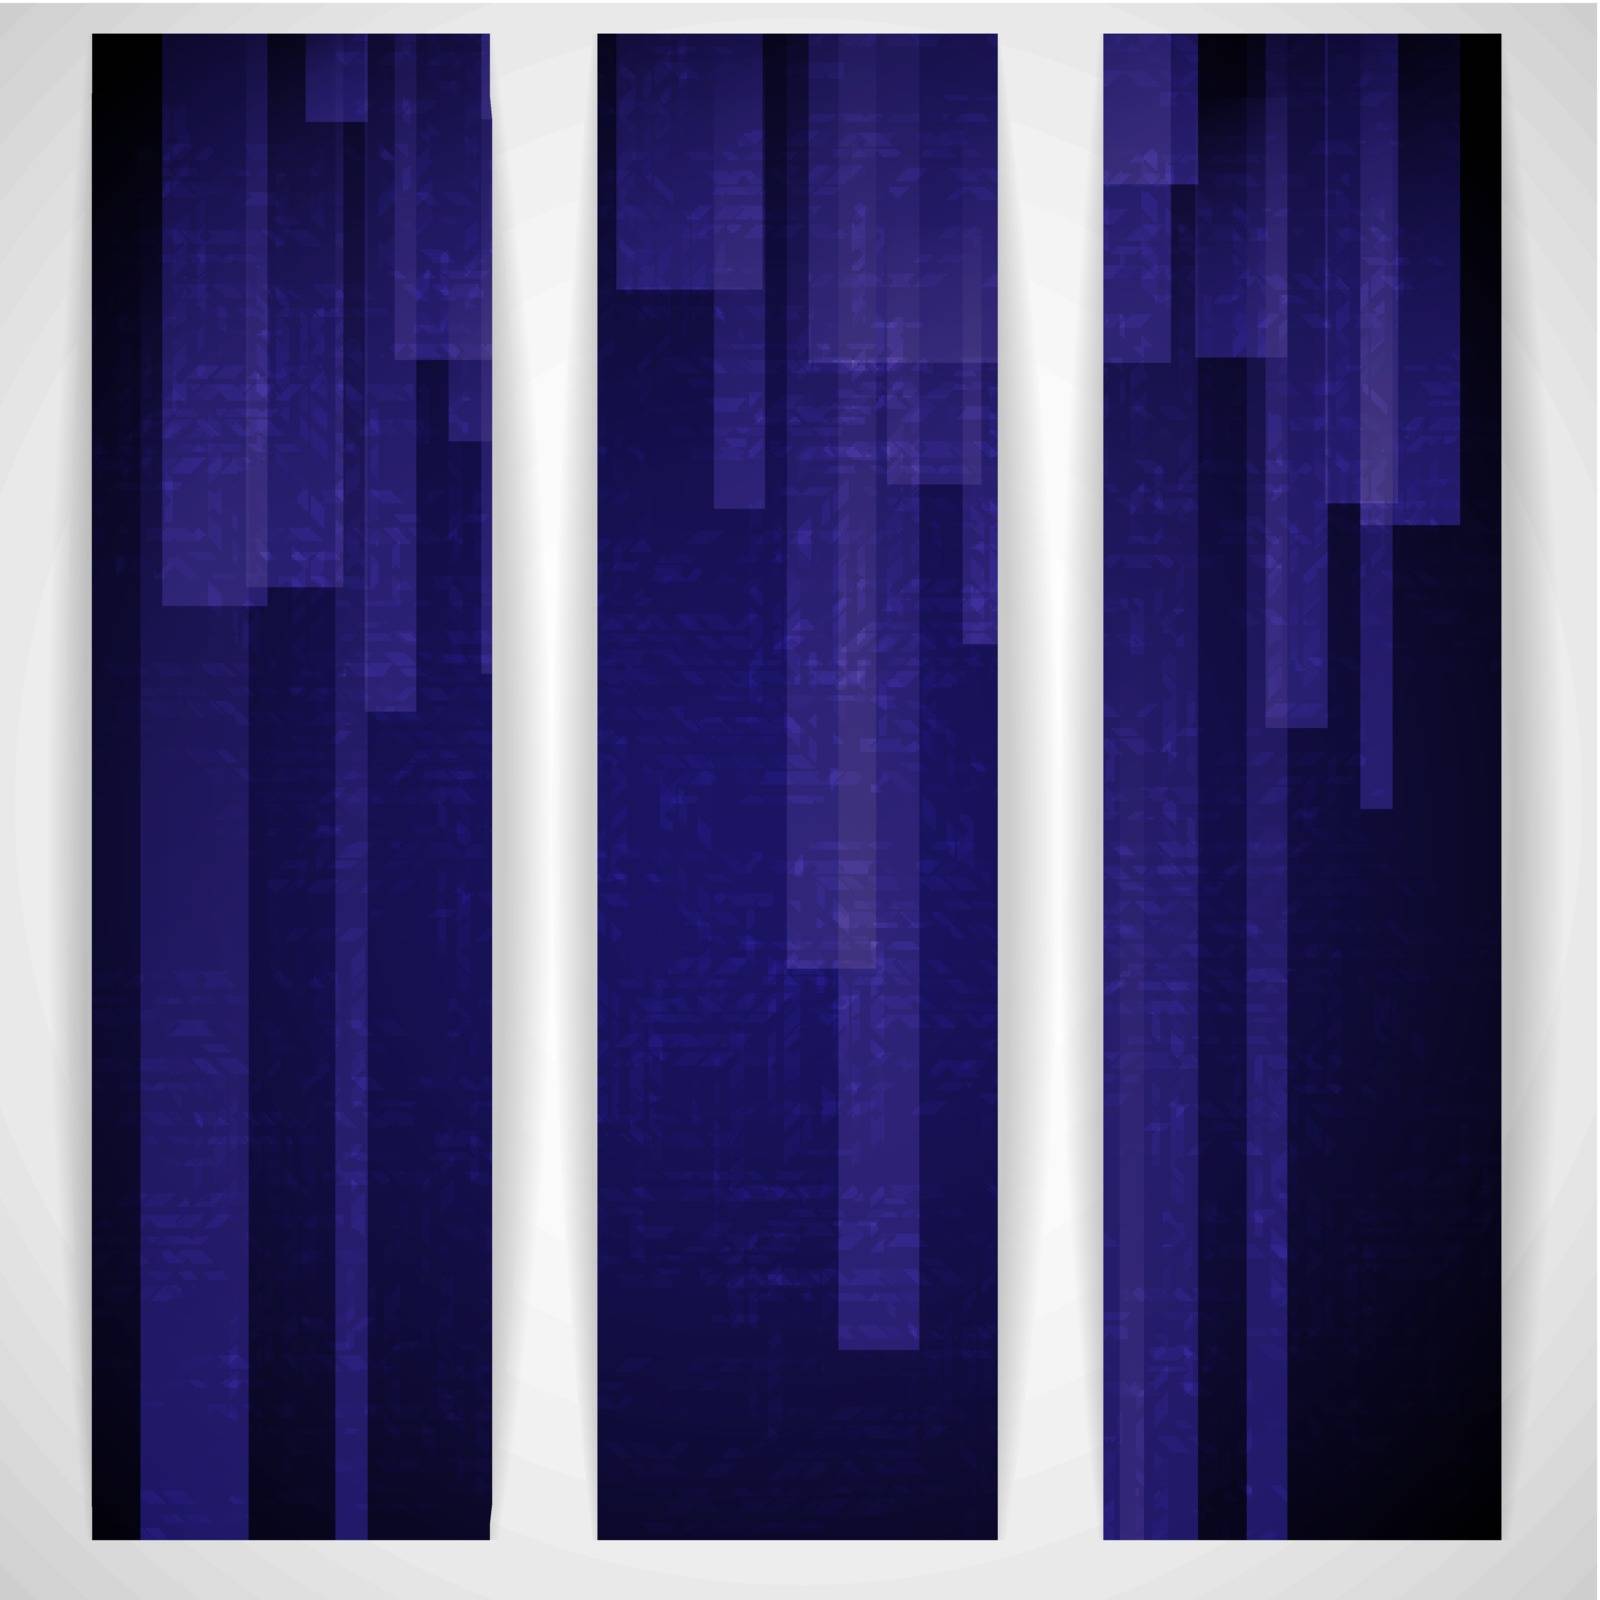 Abstract Blue Rectangle Shapes Banner. Vector Illustration. Eps 10.